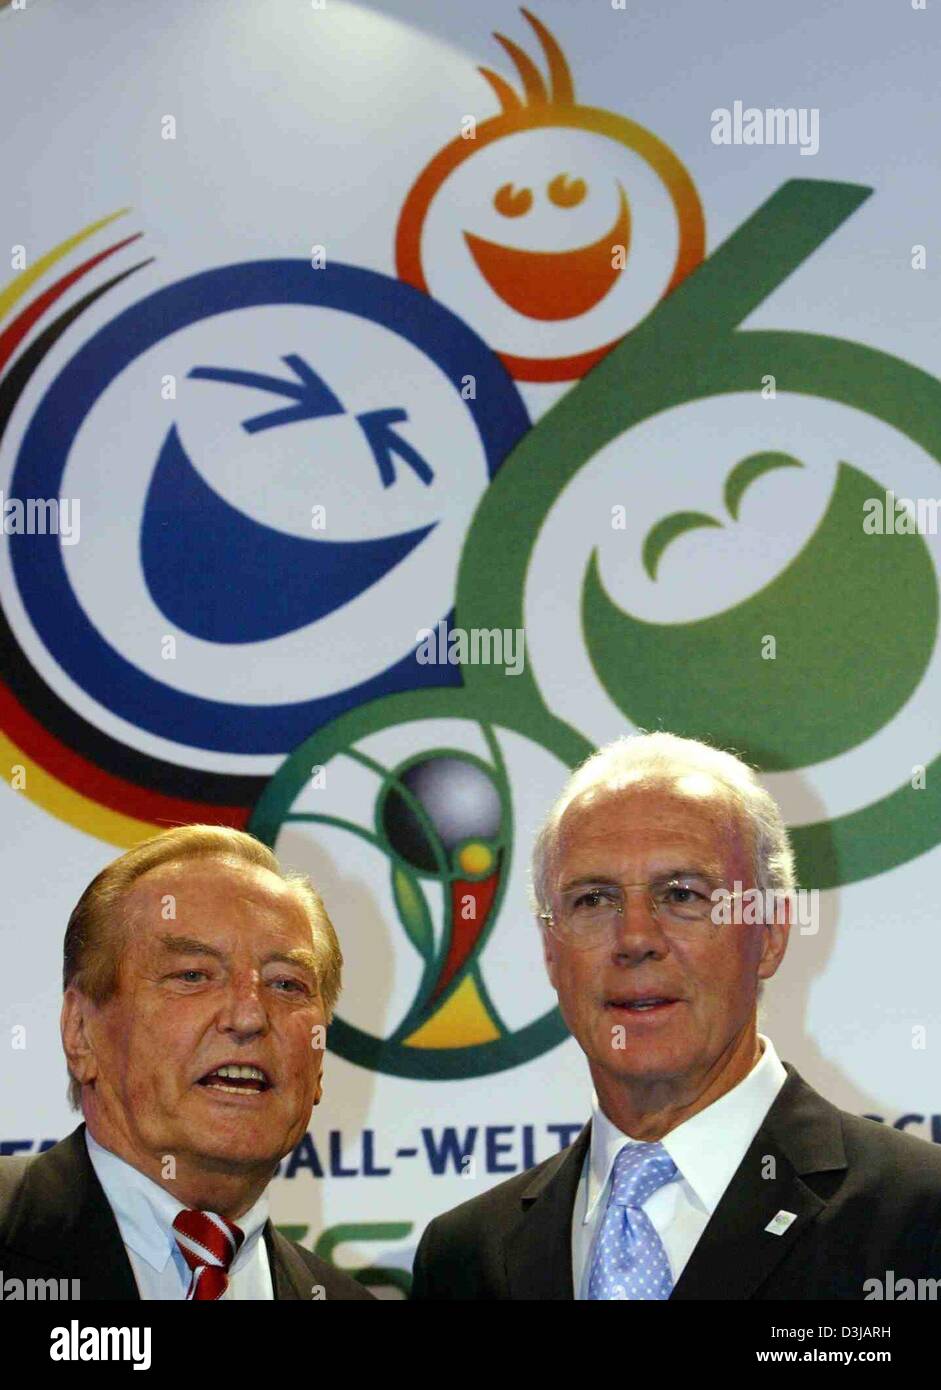 (dpa) - Gerhard Mayer-Vorfelder (L), President of the German Soccer Federation (DFB) and Franz Beckenbauer, President of the organising committee of the FIFA World Cup 2006, stand next to each other in front of the world cup logo and smile during a reception at the town hall in Dortmund, Germany, 18 March 2004. The organising committee invited guests from the world of entertainment Stock Photo